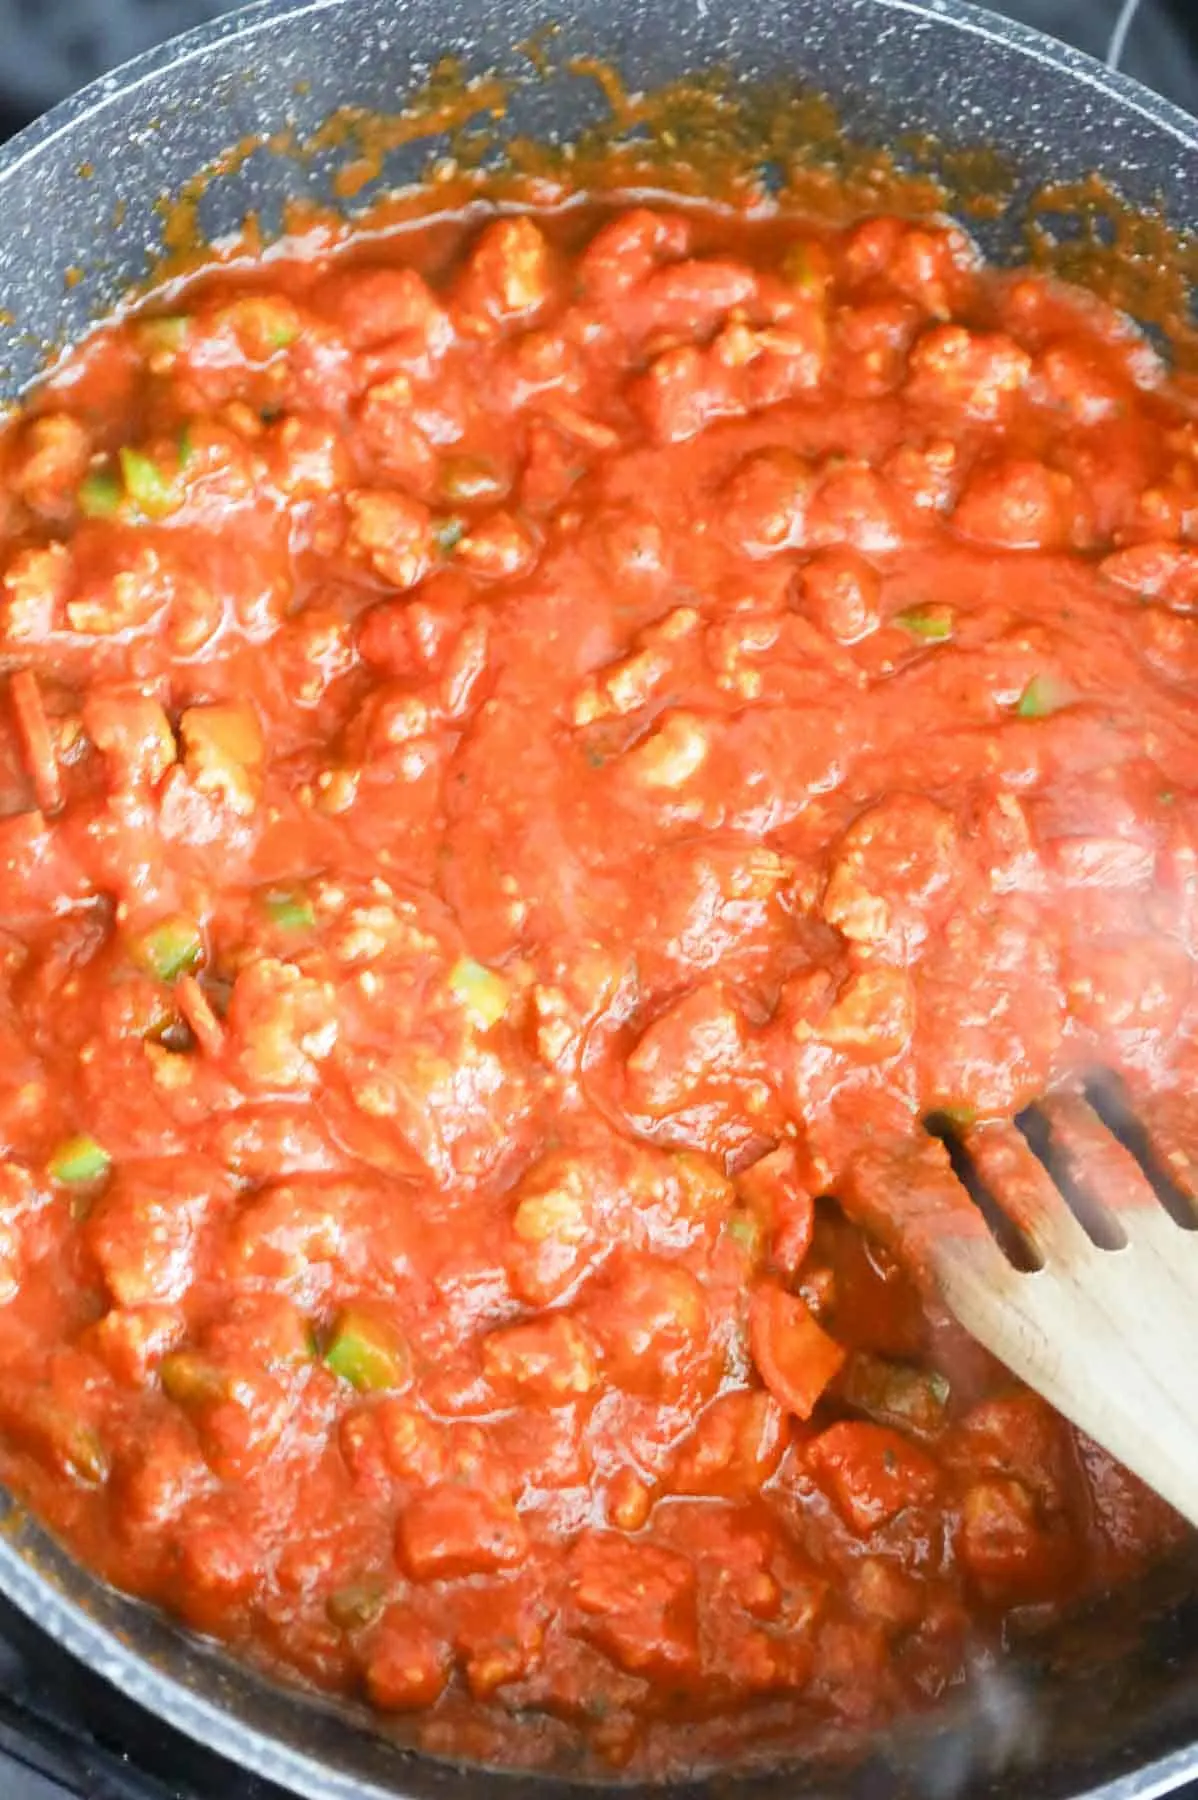 marinara sauce and meat mixture in a skillet